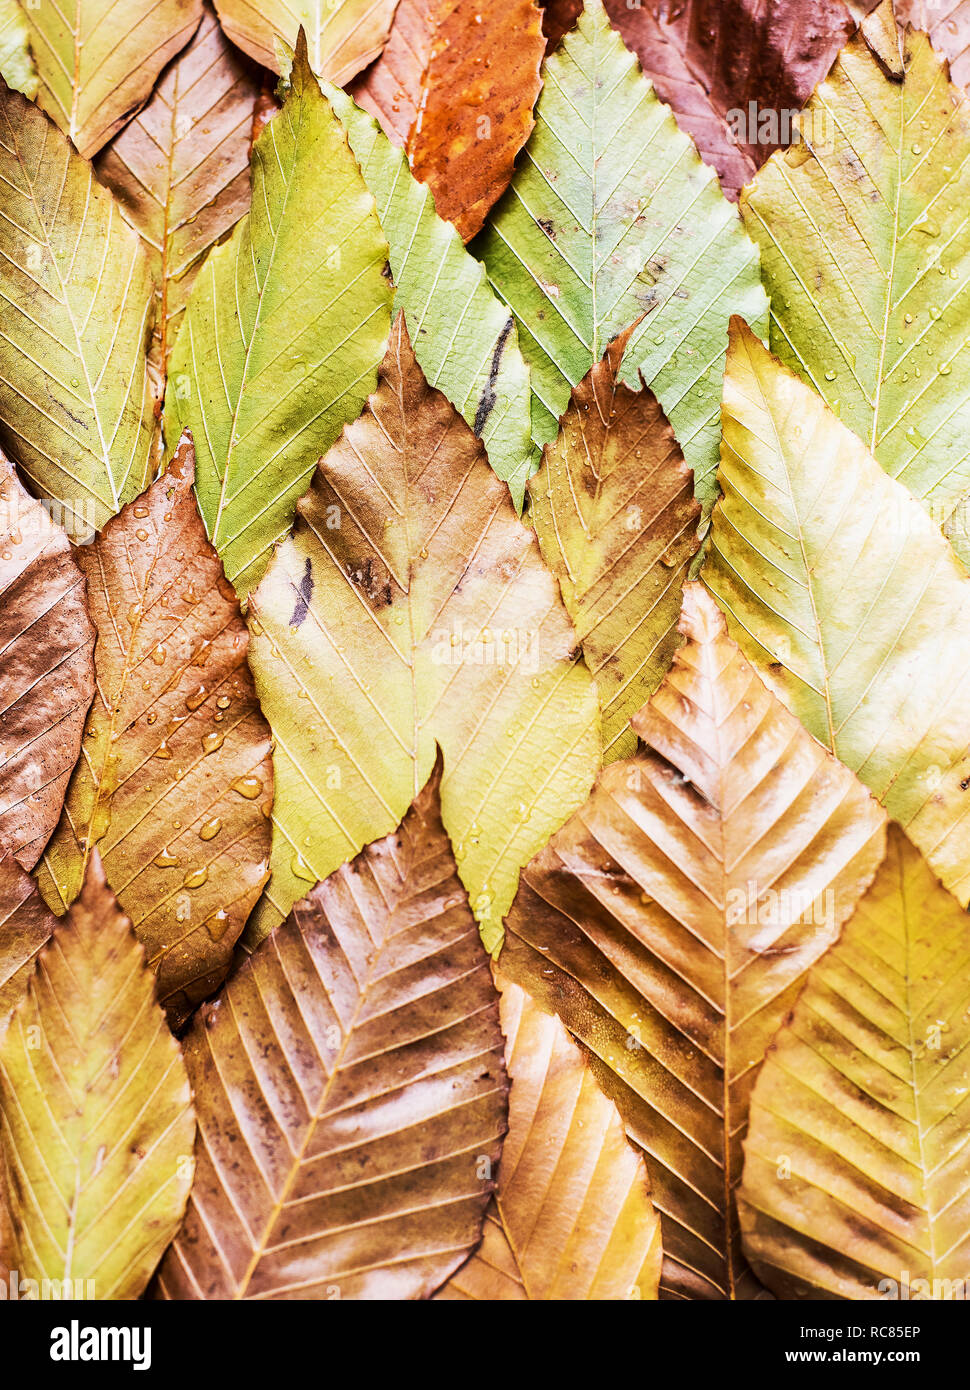 Overlapping autumn leaves, still life, overhead view Stock Photo